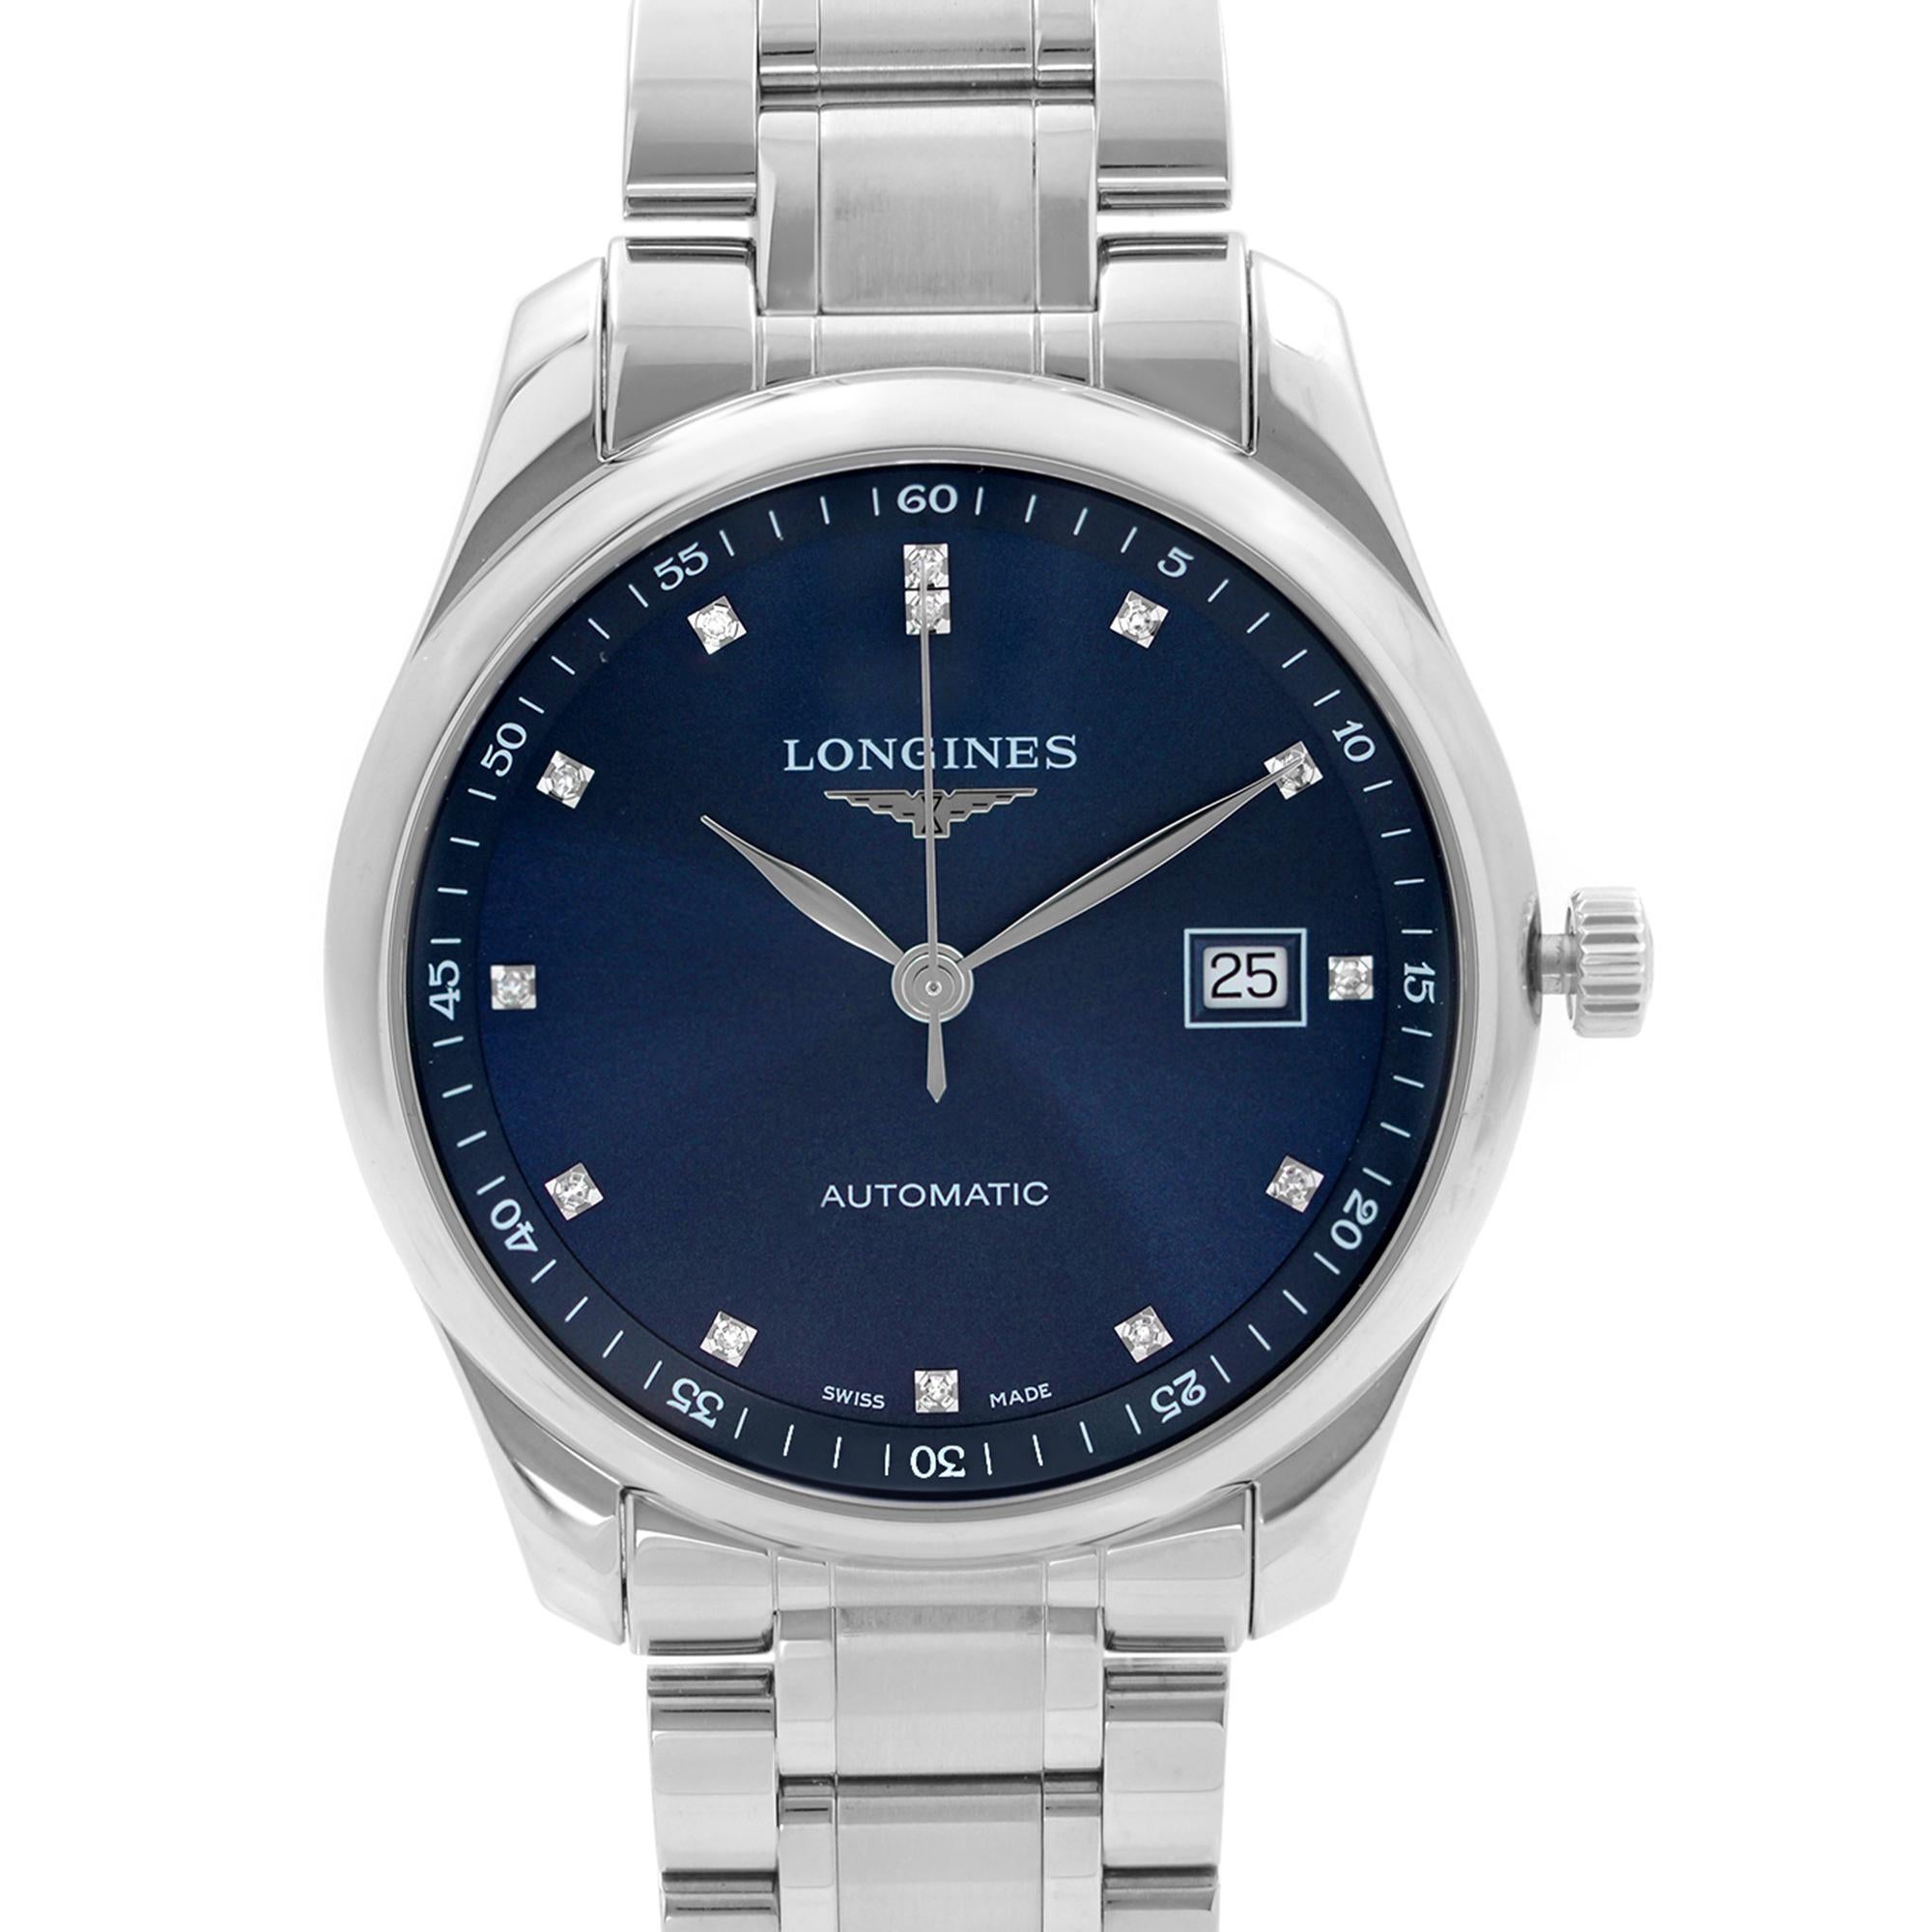 Display Model Longines Master Collection Steel Blue Dial Automatic Men's Watch L2.793.4.92.6. This Beautiful Timepiece is Powered by Mechanical (Automatic) Movement And Features: Round Stainless Steel Case & Bracelet Fixed Stainless Steel Bezel,